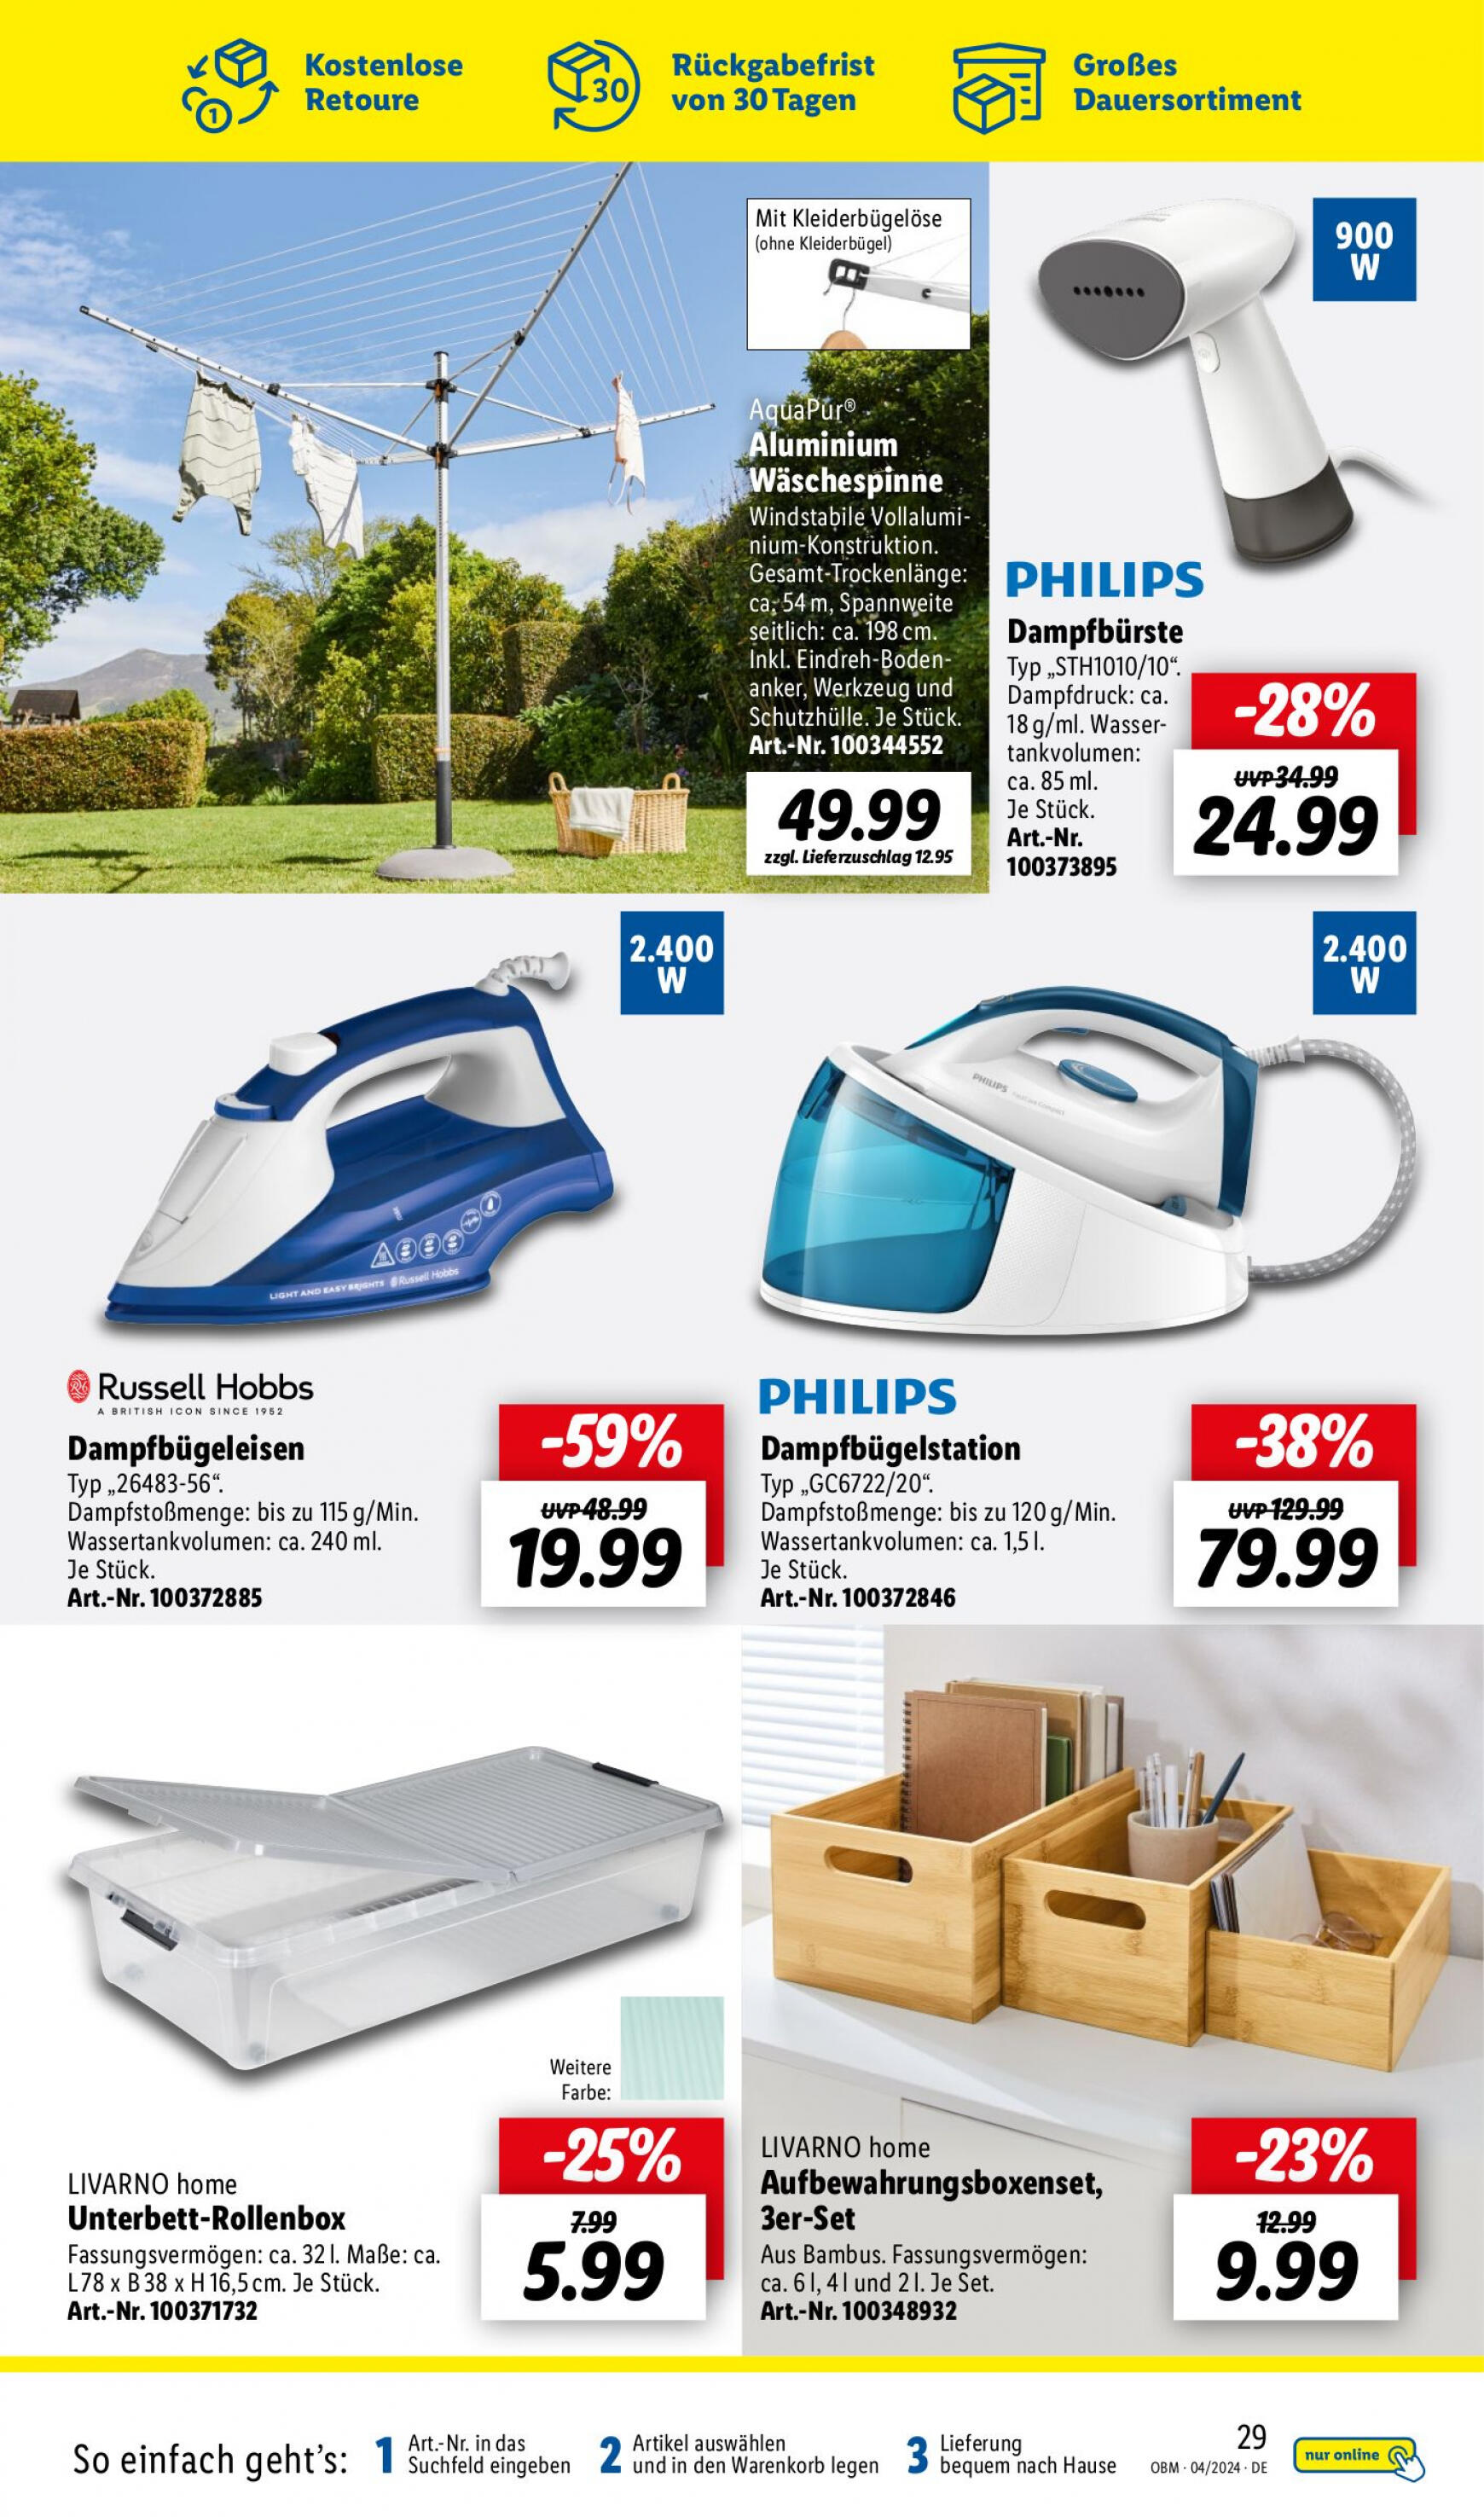 lidl - Flyer Lidl - Aktuelle Onlineshop-Highlights aktuell 01.04. - 30.04. - page: 29